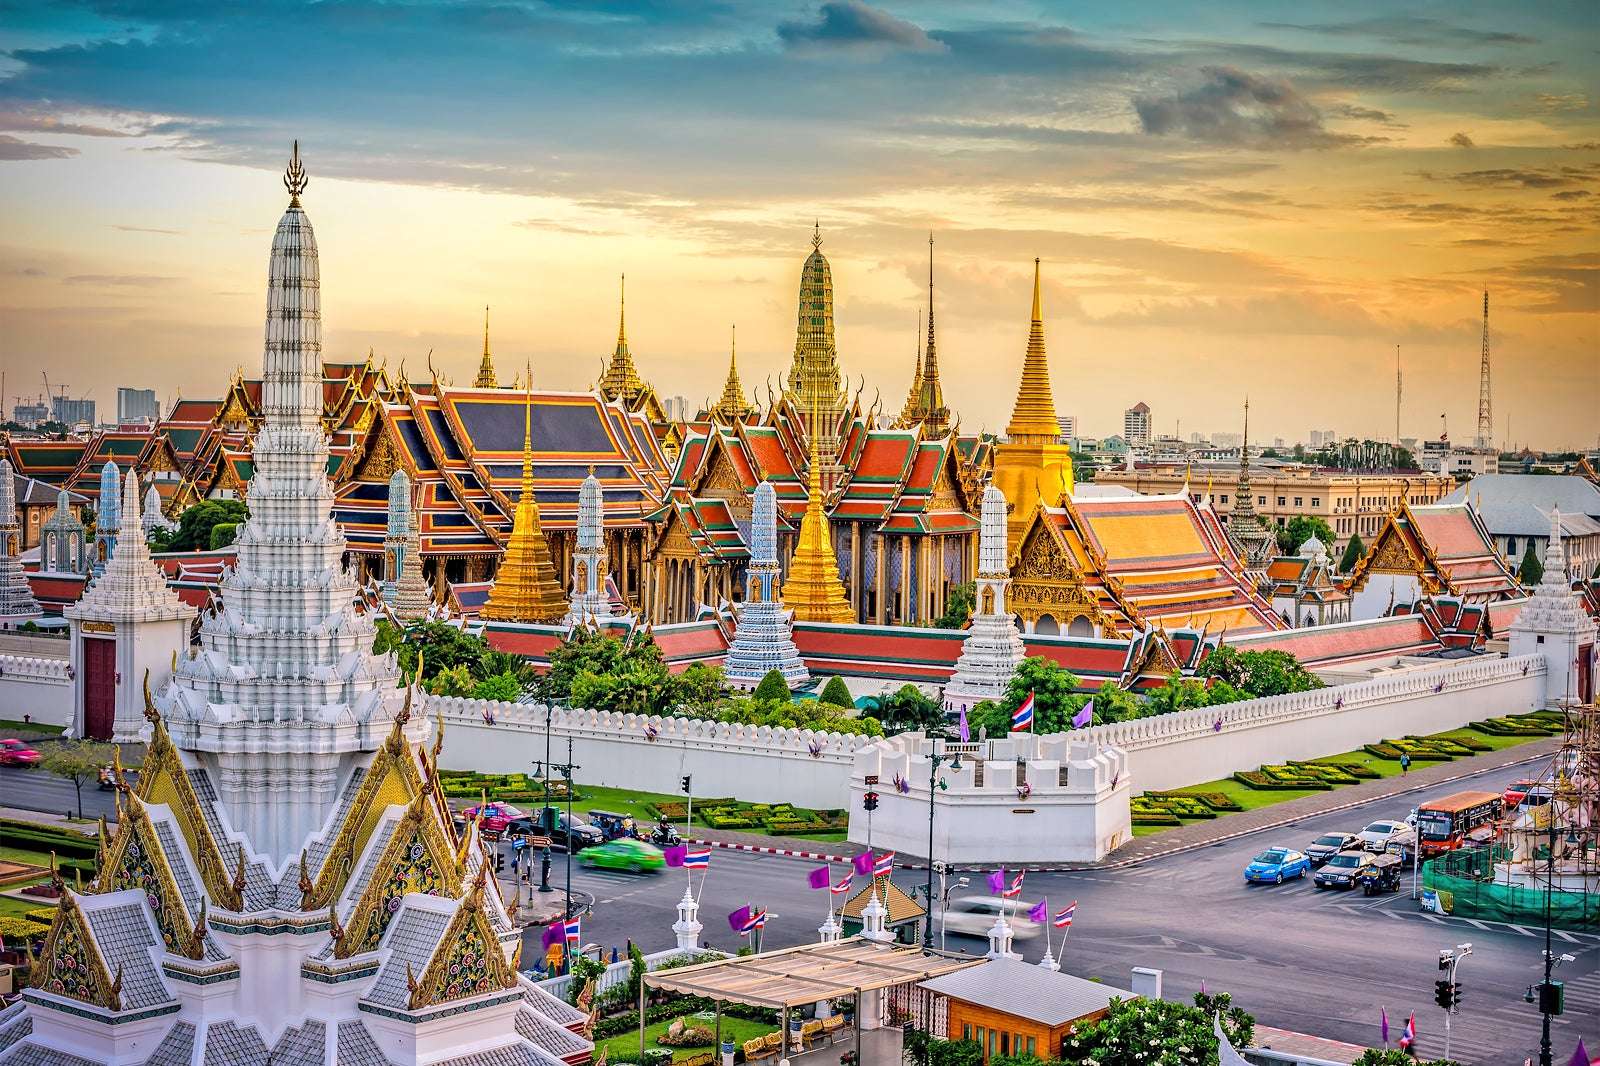 Grand Palace, Thailand pussel online från foto